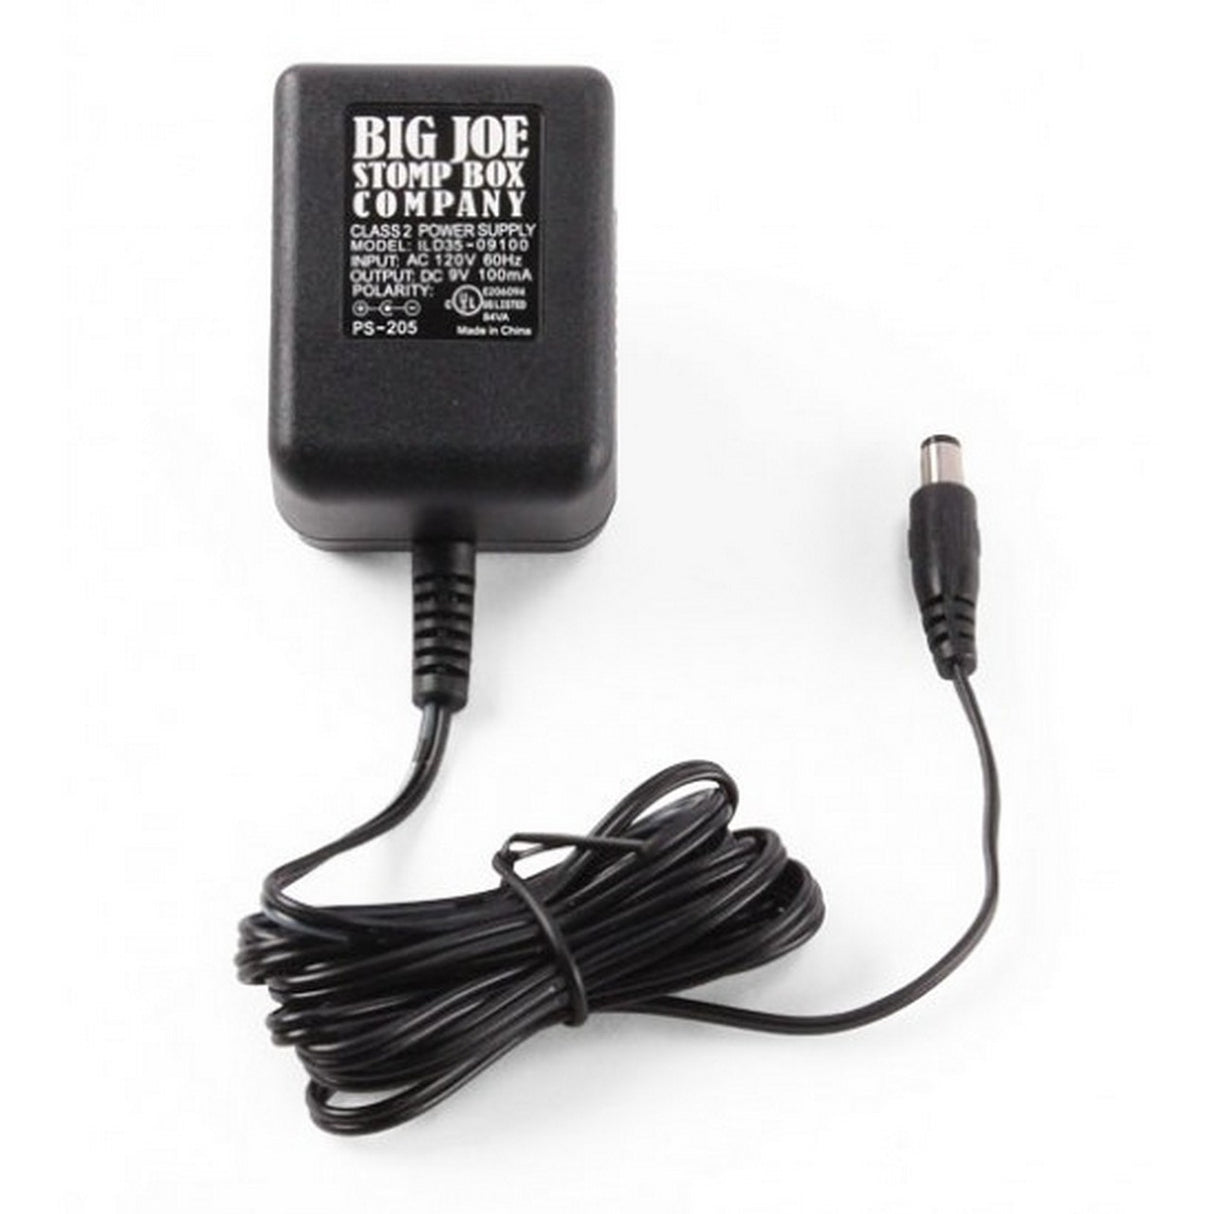 Big Joe Stomp Box Company 9v Power Supply PS-205 | Regulated Linear Power Supply For Power Effect Pedals